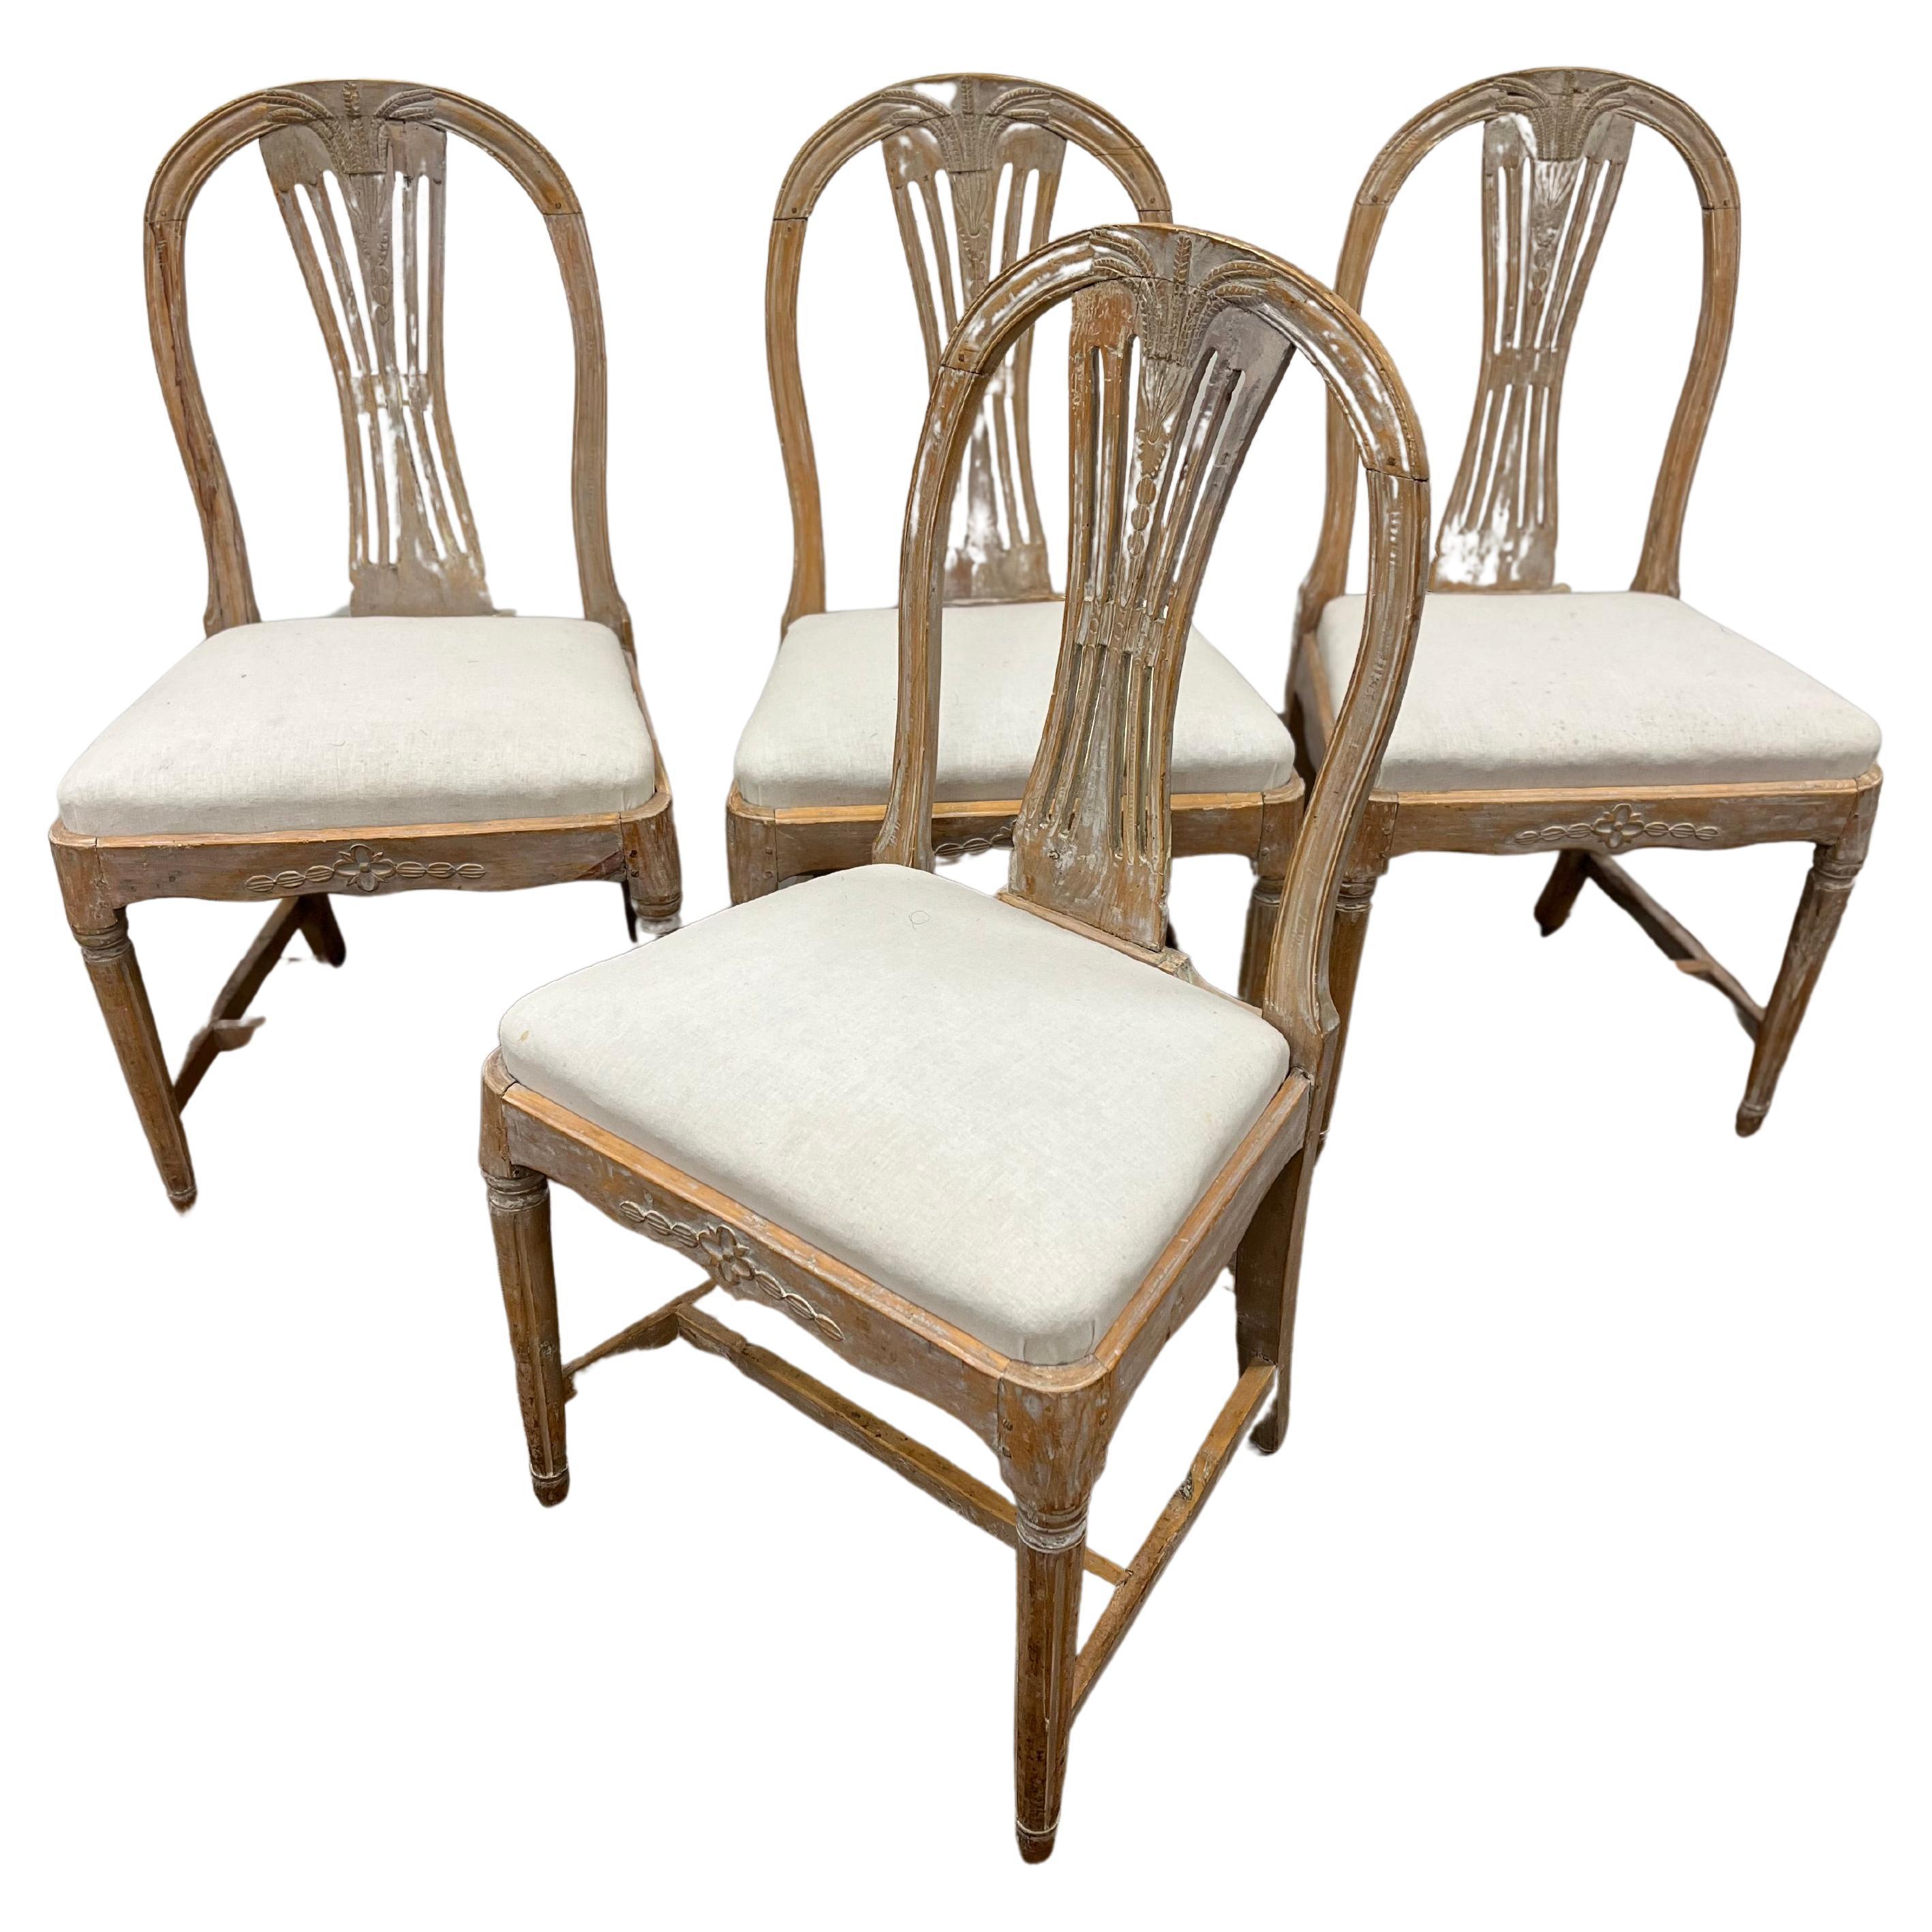 A Set of Four 19th Century Swedish Late Gustavian Chairs